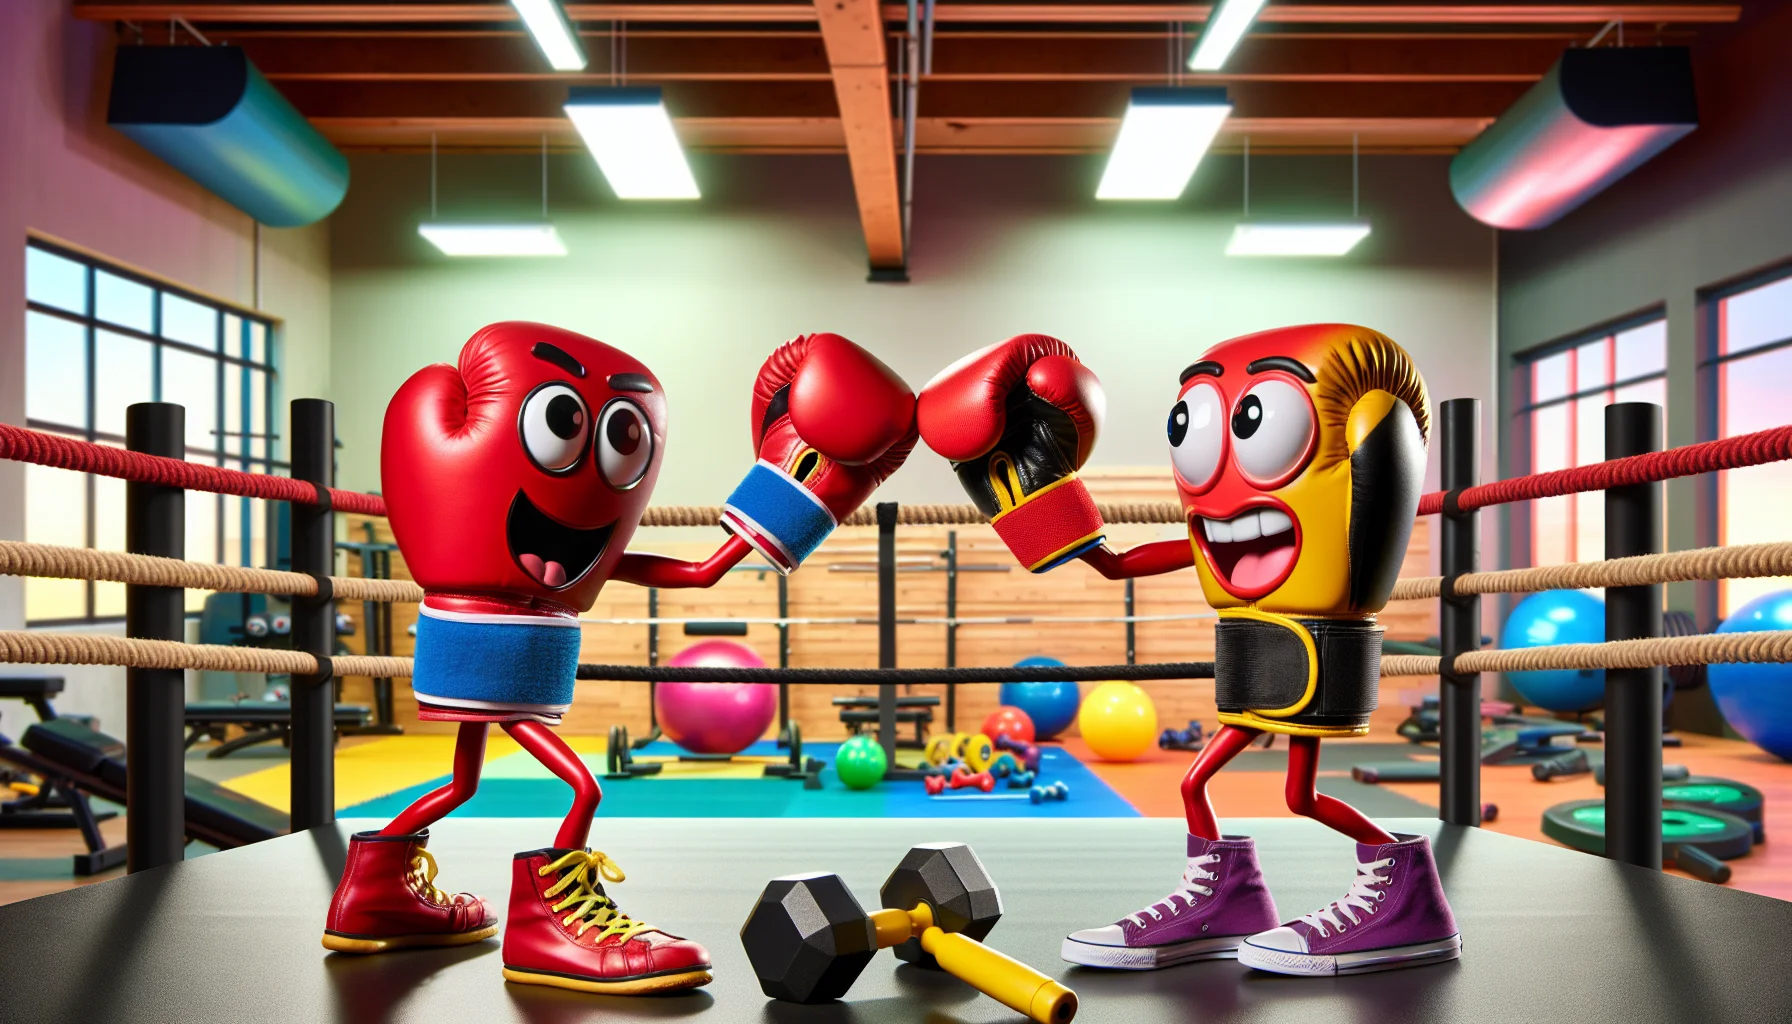 Generate an amusing and realistic image depicting a pair of kickboxing gloves and boxing gloves engaging in a friendly tug of war, standing on their wrist sections, with determined, comic expressions on their padding areas. The kickboxing gloves are brightly colored while the boxing gloves are in traditional red. They are on a background of a vibrant gym, with various fitness equipment scattered around: weights, skipping ropes, and exercise benches. Adding a fun tagline in the image saying, 'Exercise can be fun too!' to encourage viewers to maintain a healthy lifestyle.